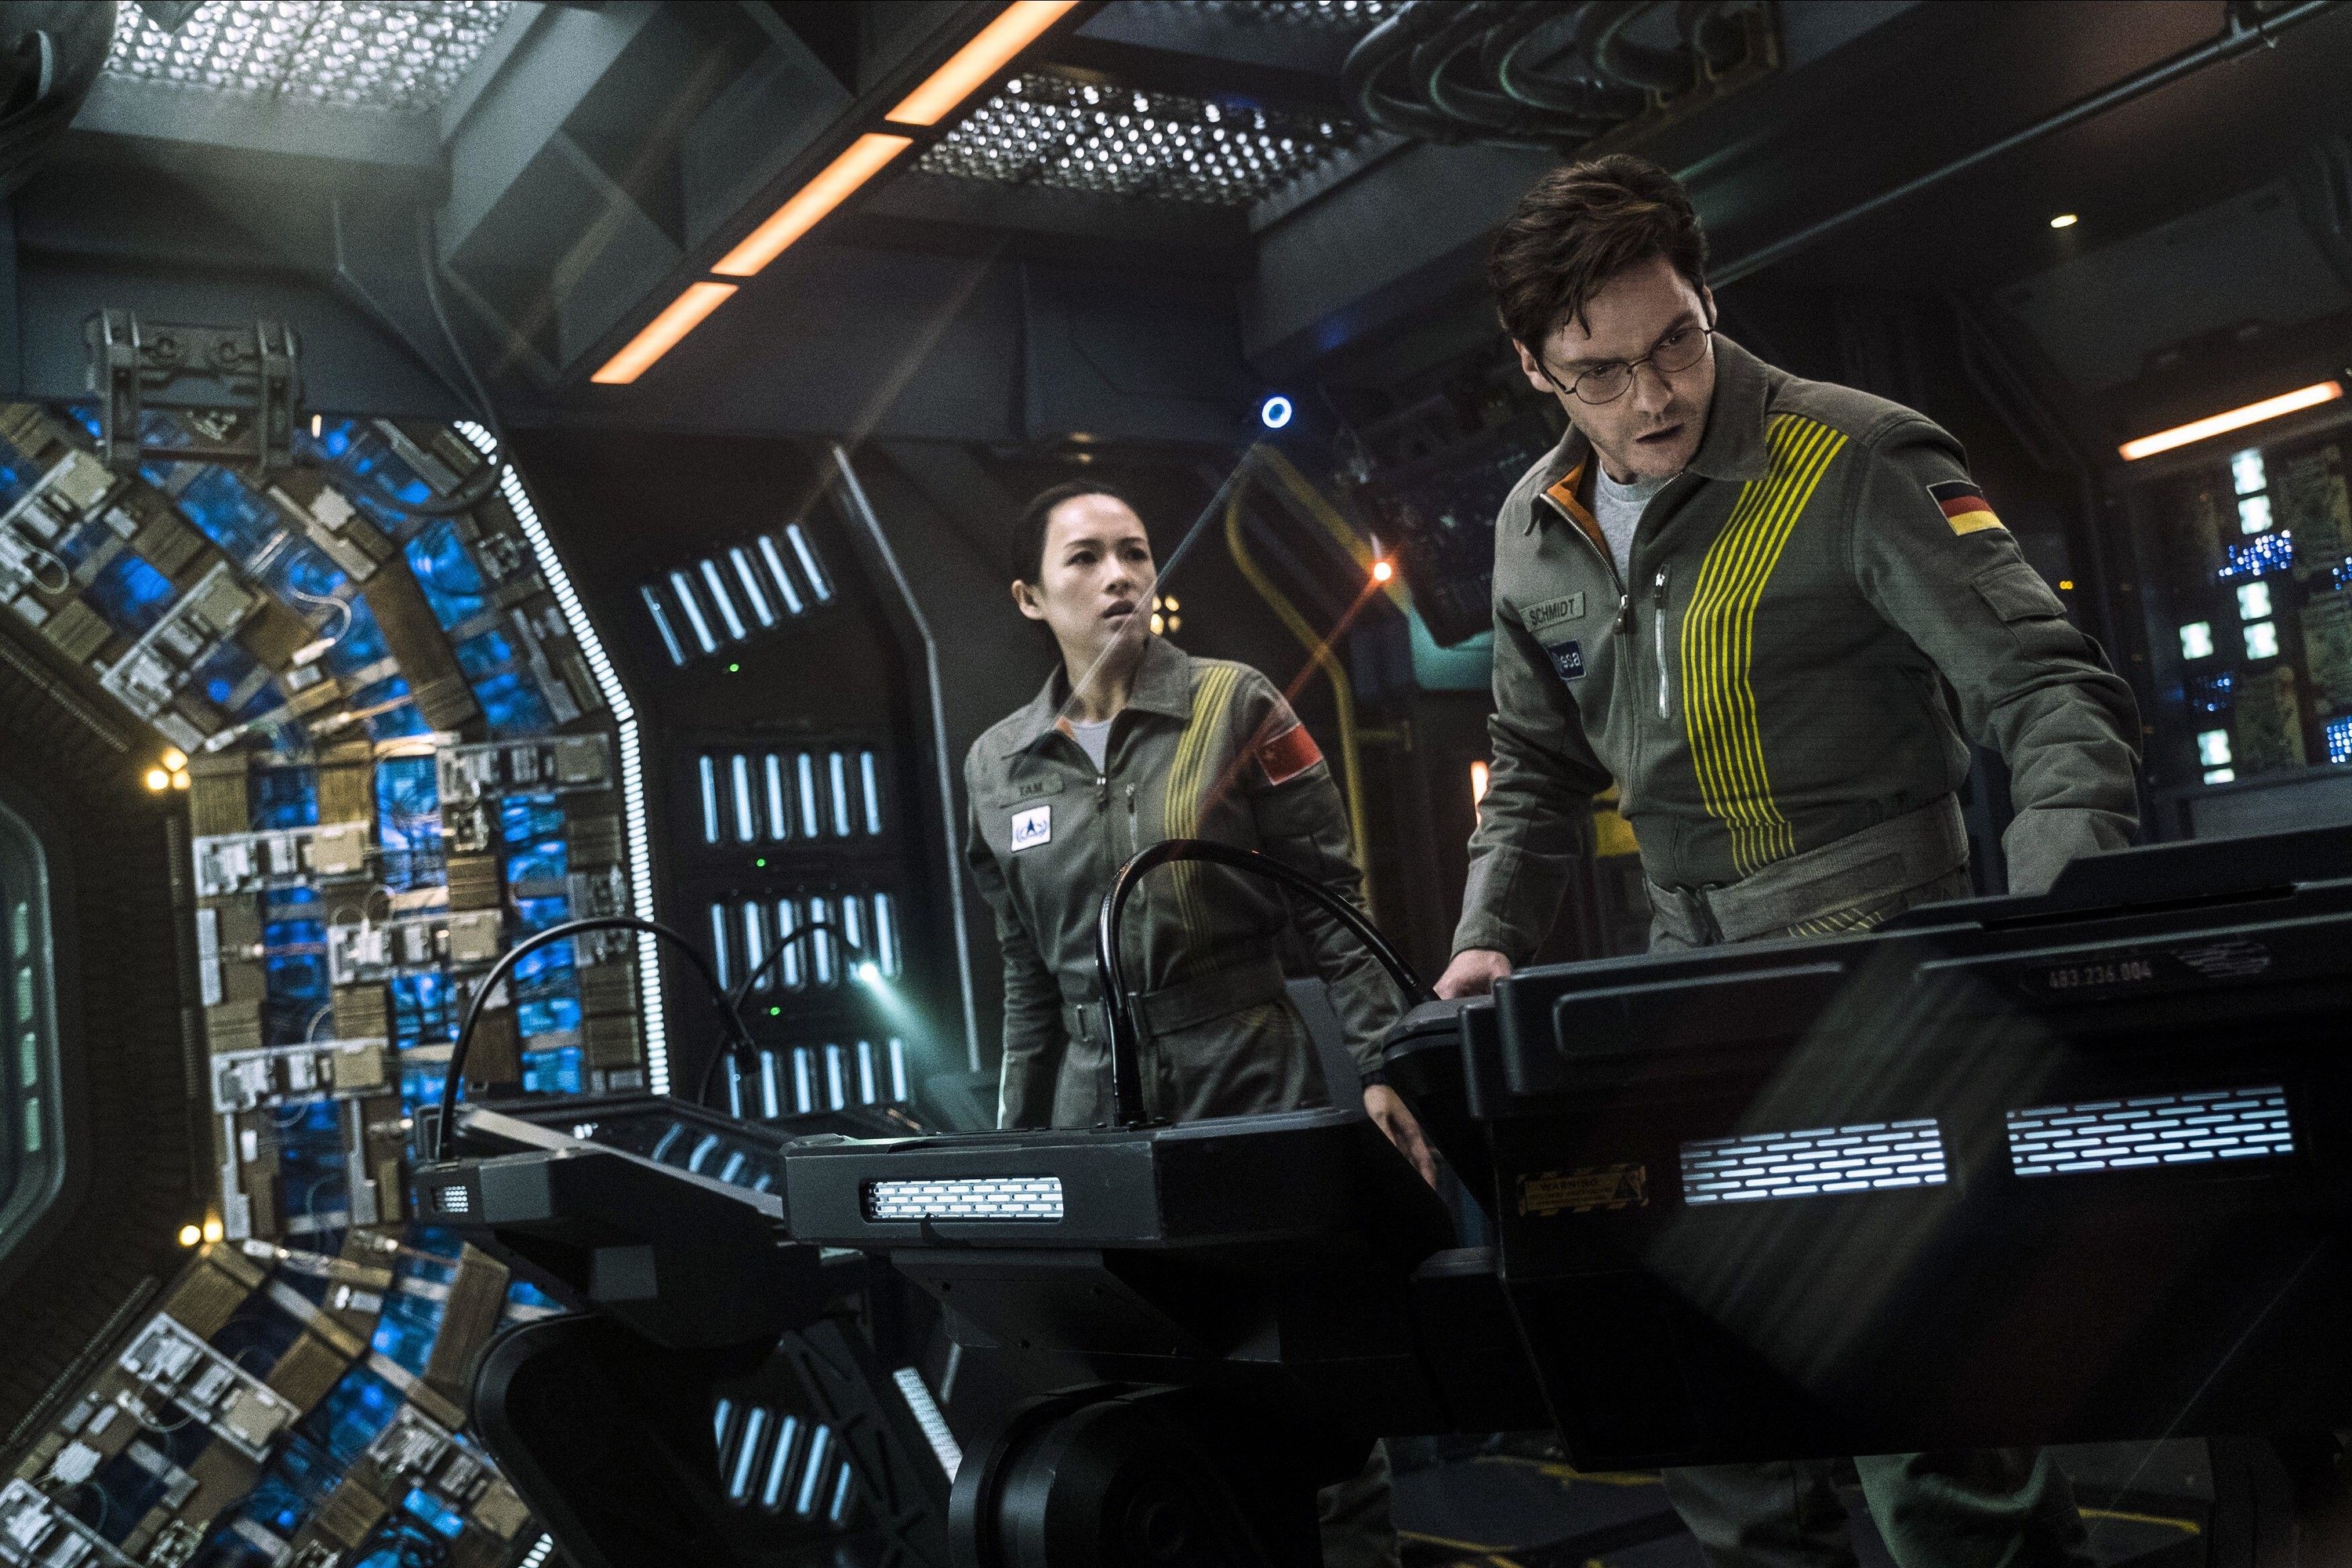 Zhang Ziyi and Daniel Bruhl in “The Cloverfield Paradox”